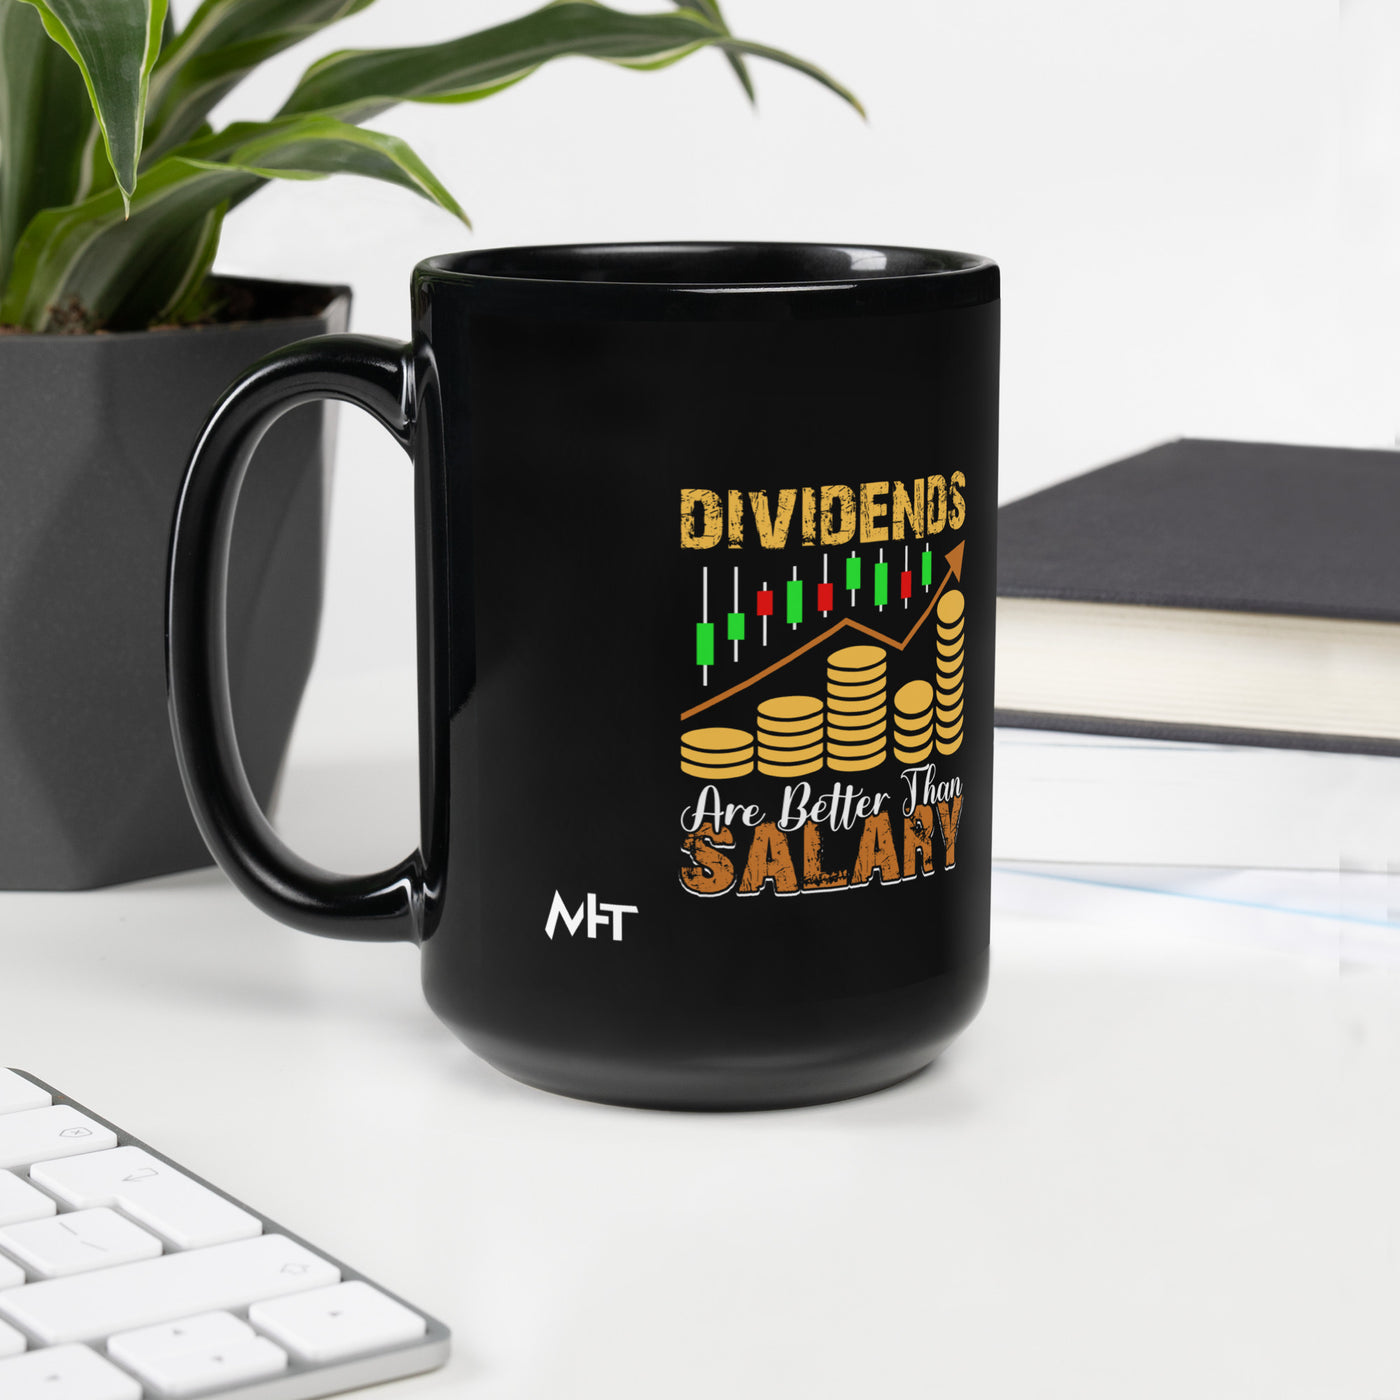 Dividends are Better than Salary - Black Glossy Mug